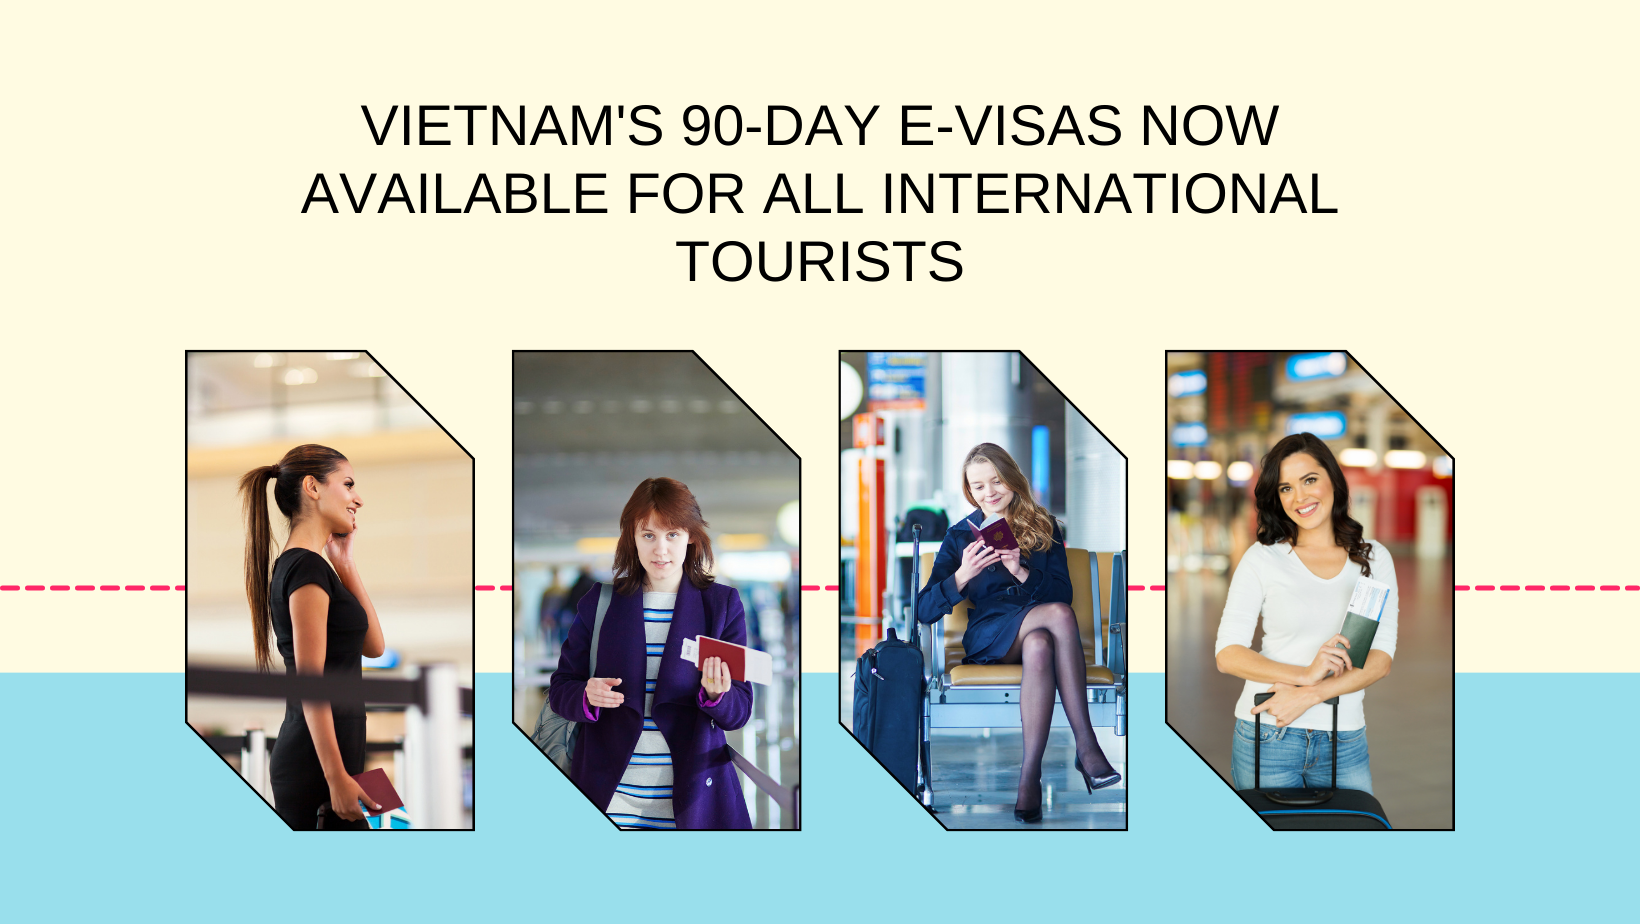 Vietnam's 90-Day E-Visas Now Available for All International Tourists